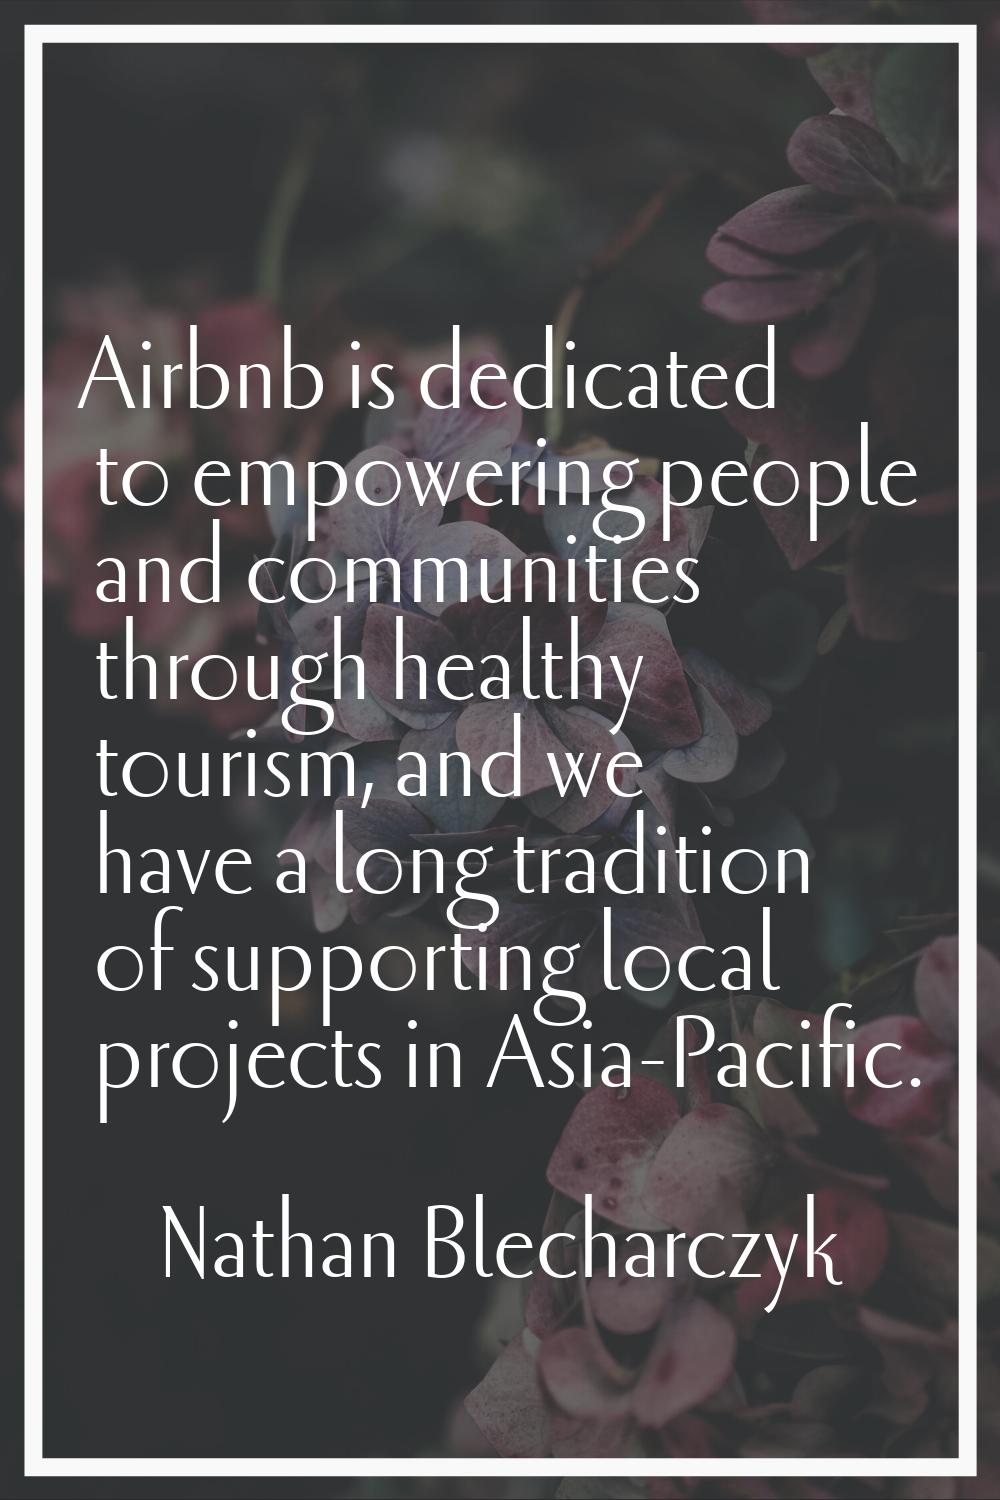 Airbnb is dedicated to empowering people and communities through healthy tourism, and we have a lon